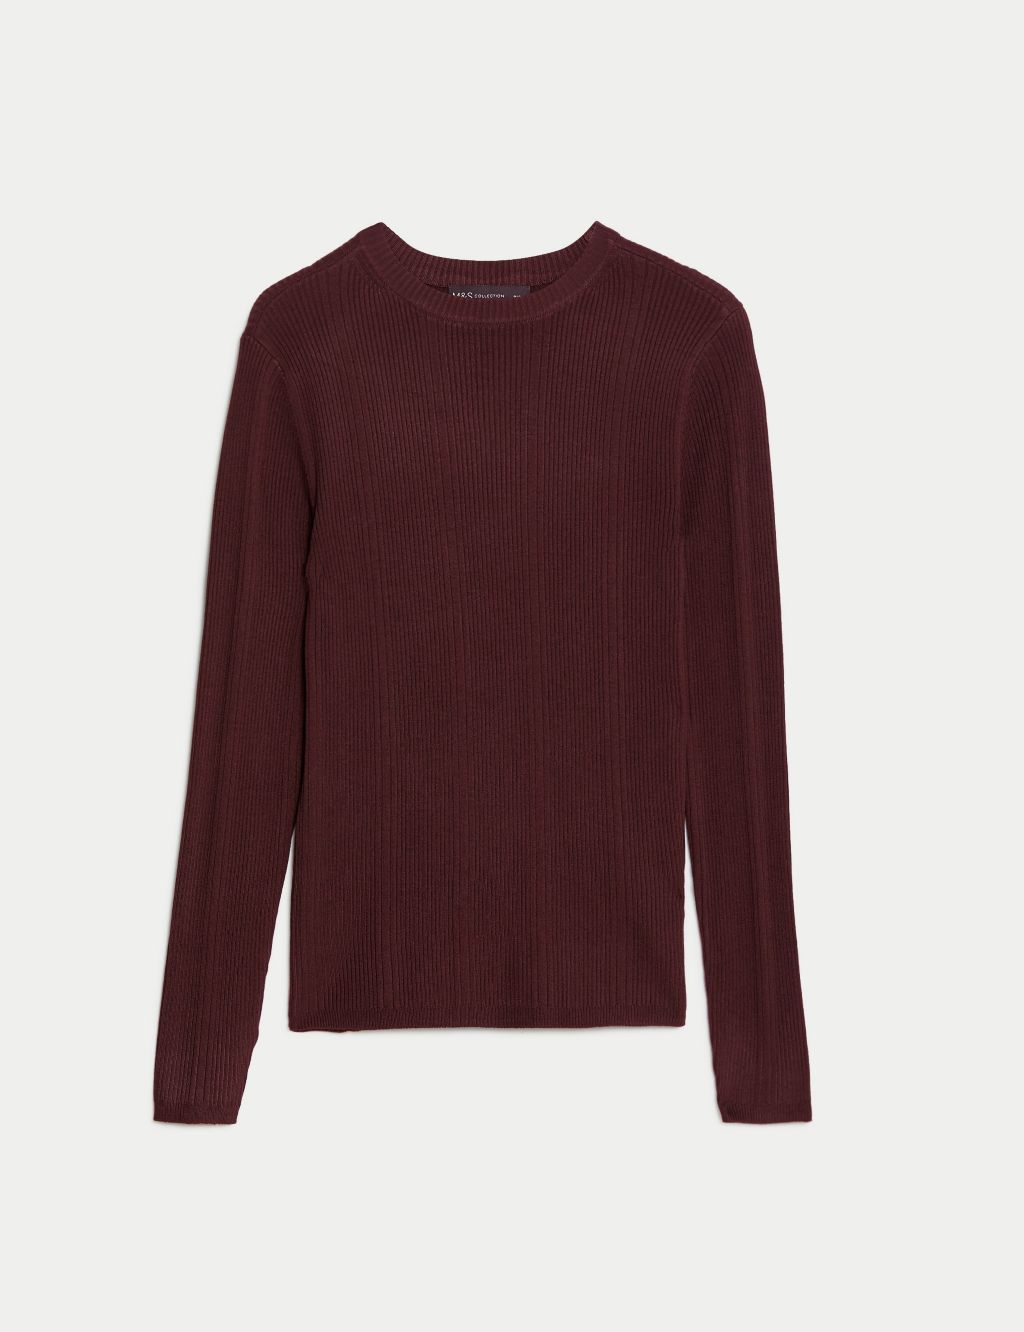 Ribbed Crew Neck Fitted Knitted Top image 2